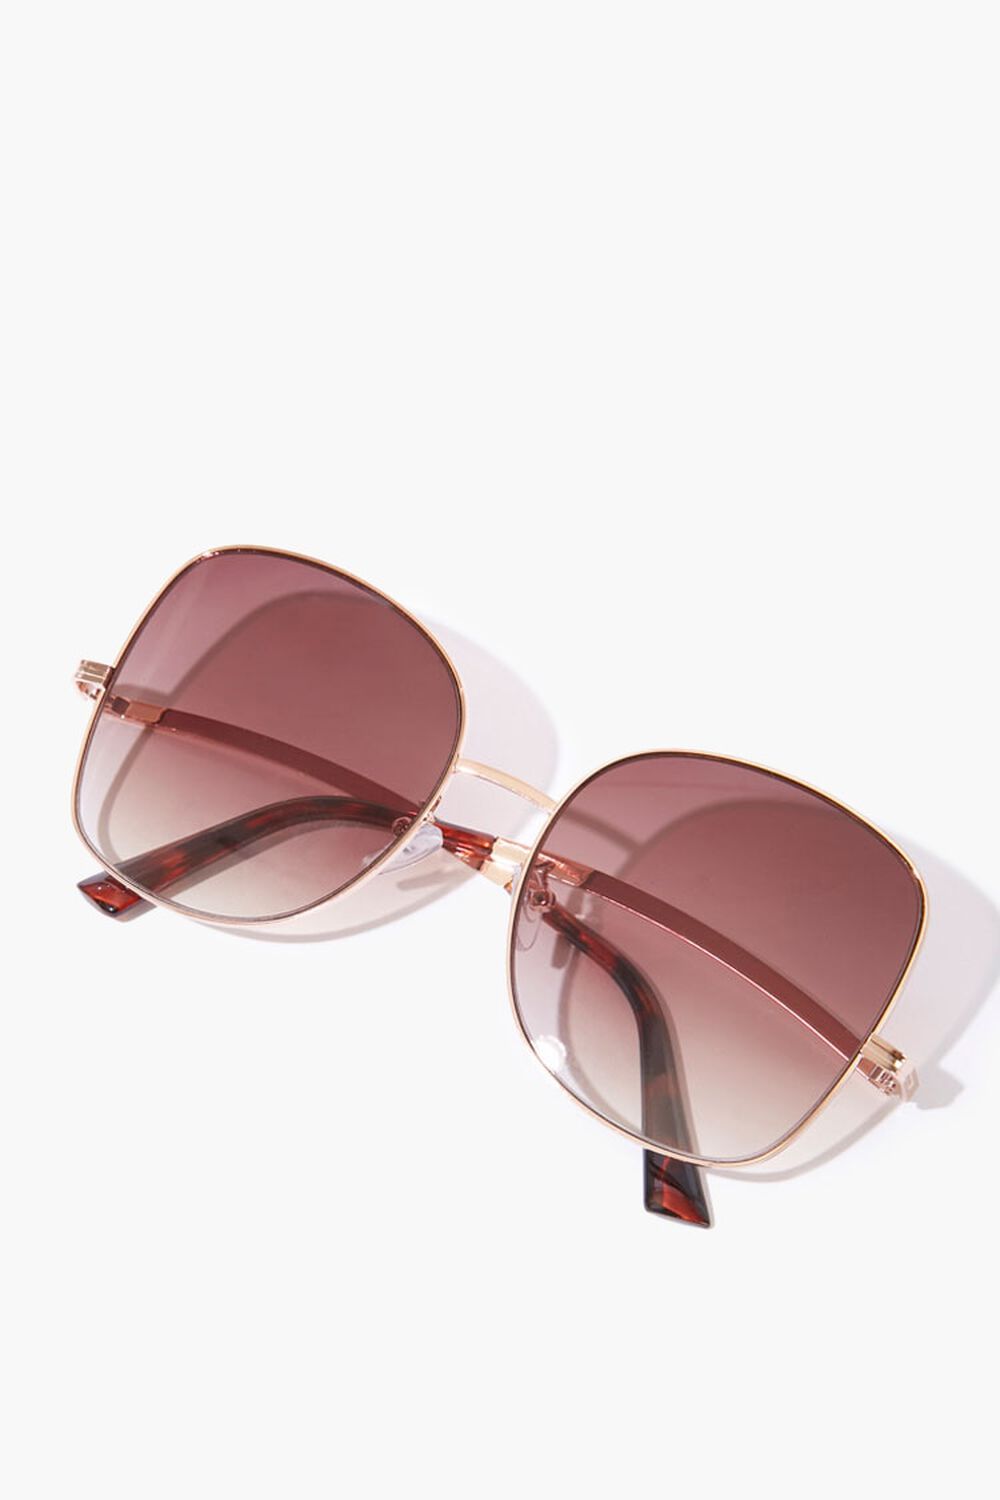 ROSE GOLD/BROWN Square Tinted Sunglasses, image 3